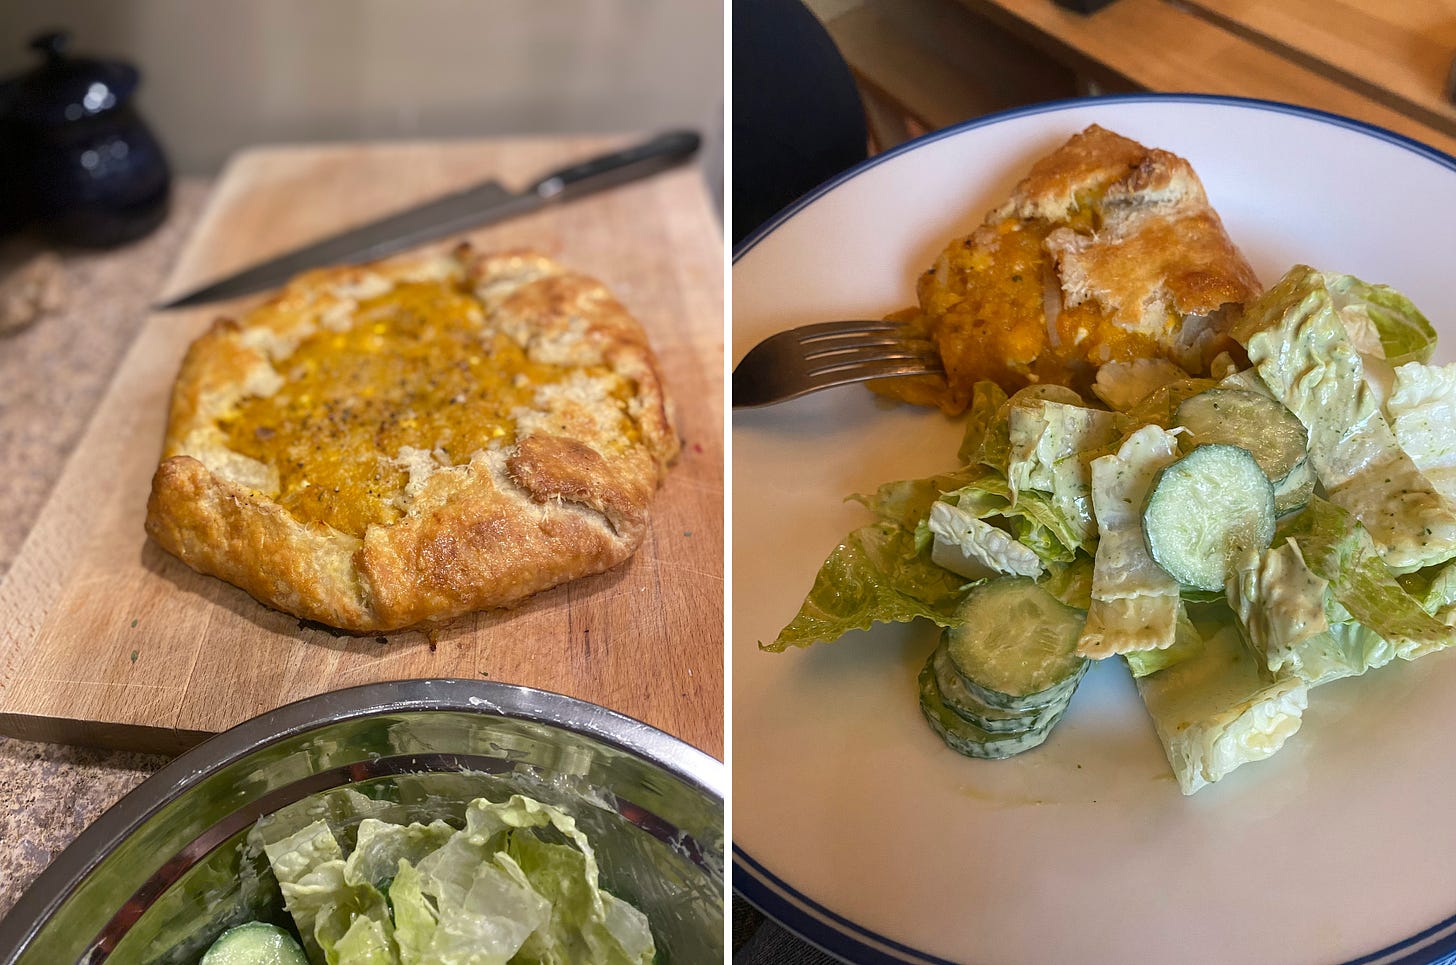 Left image: the squash galette on a wooden cutting board next to a large chef's knife. The crust is browned and the filling is dusted with black pepper. In the foreground, a metal bowl of salad is just visible. Right image: a dinner plate with a slice of the galette with a fork resting on it, and a pile of the salad— romaine and cucumbers in green goddess dressing.